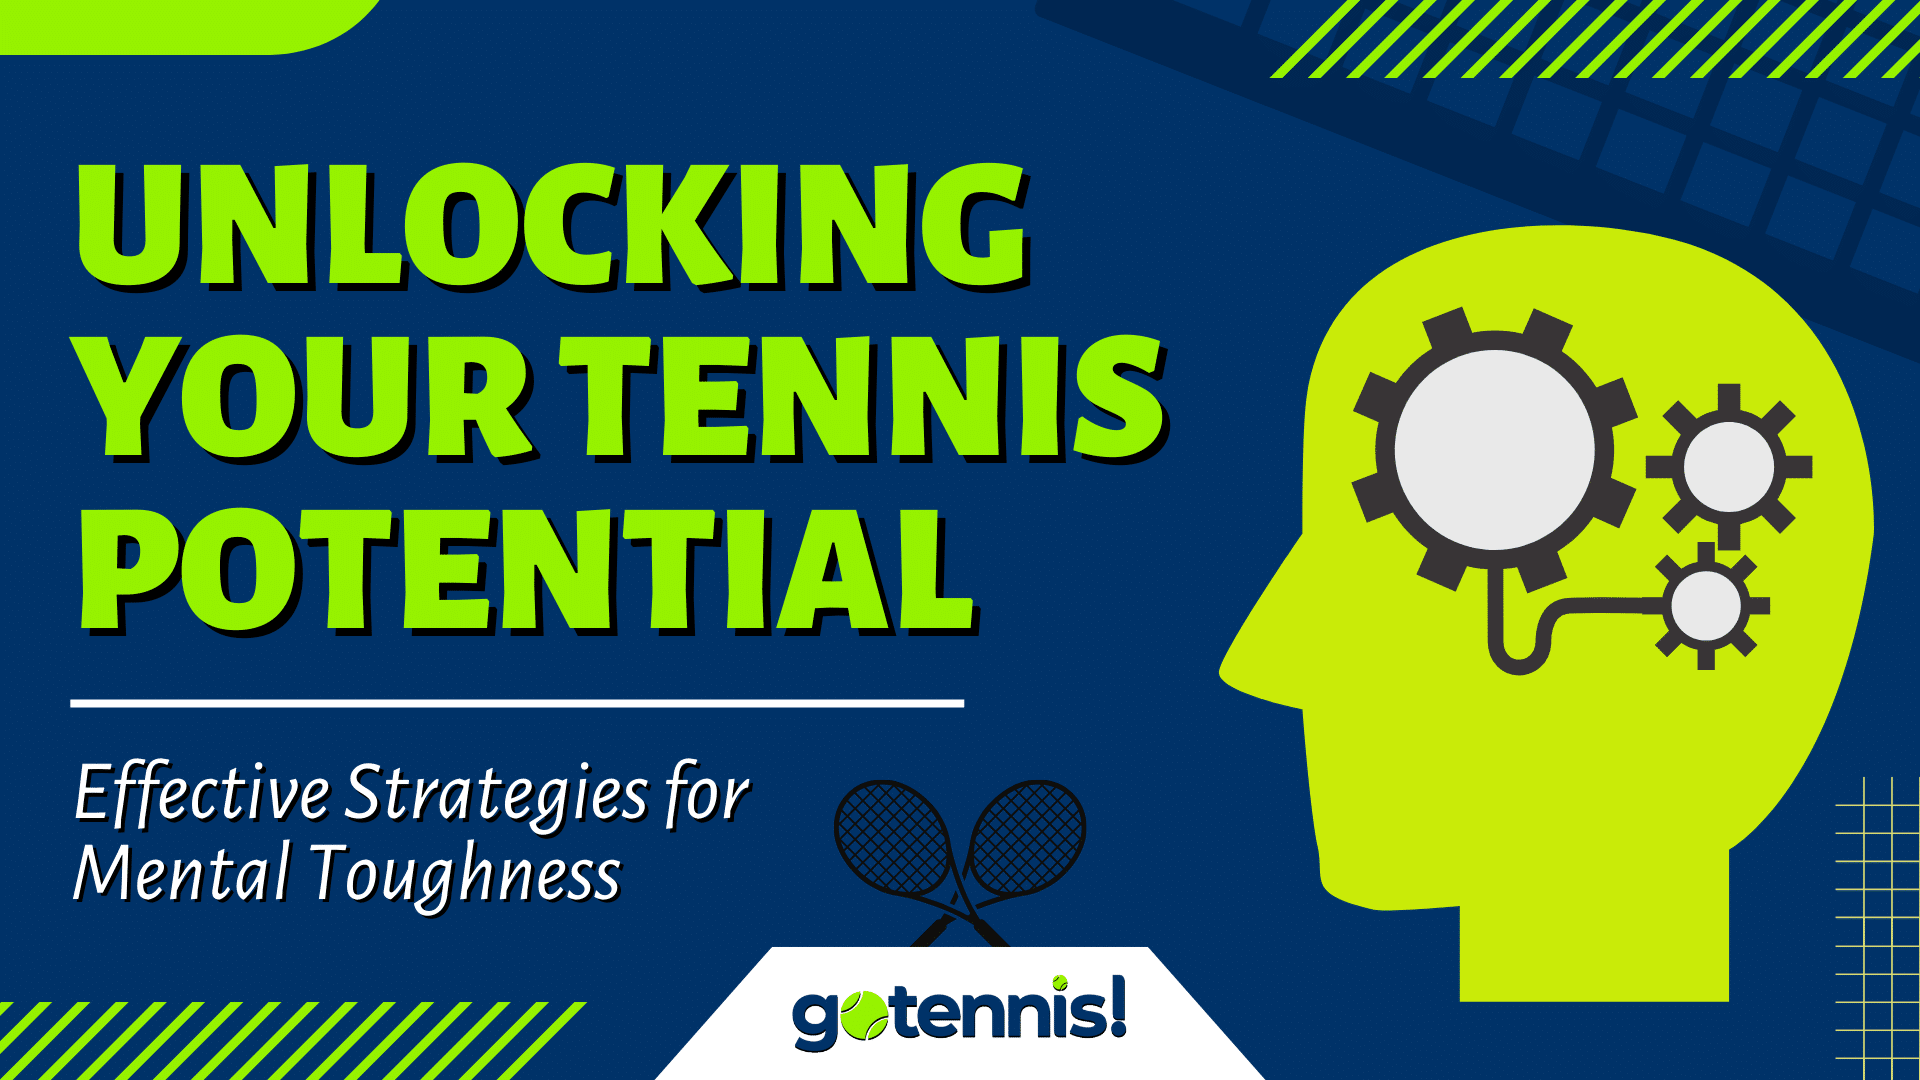 Unlocking Your Tennis Potential Effective Strategies for Mental Toughness